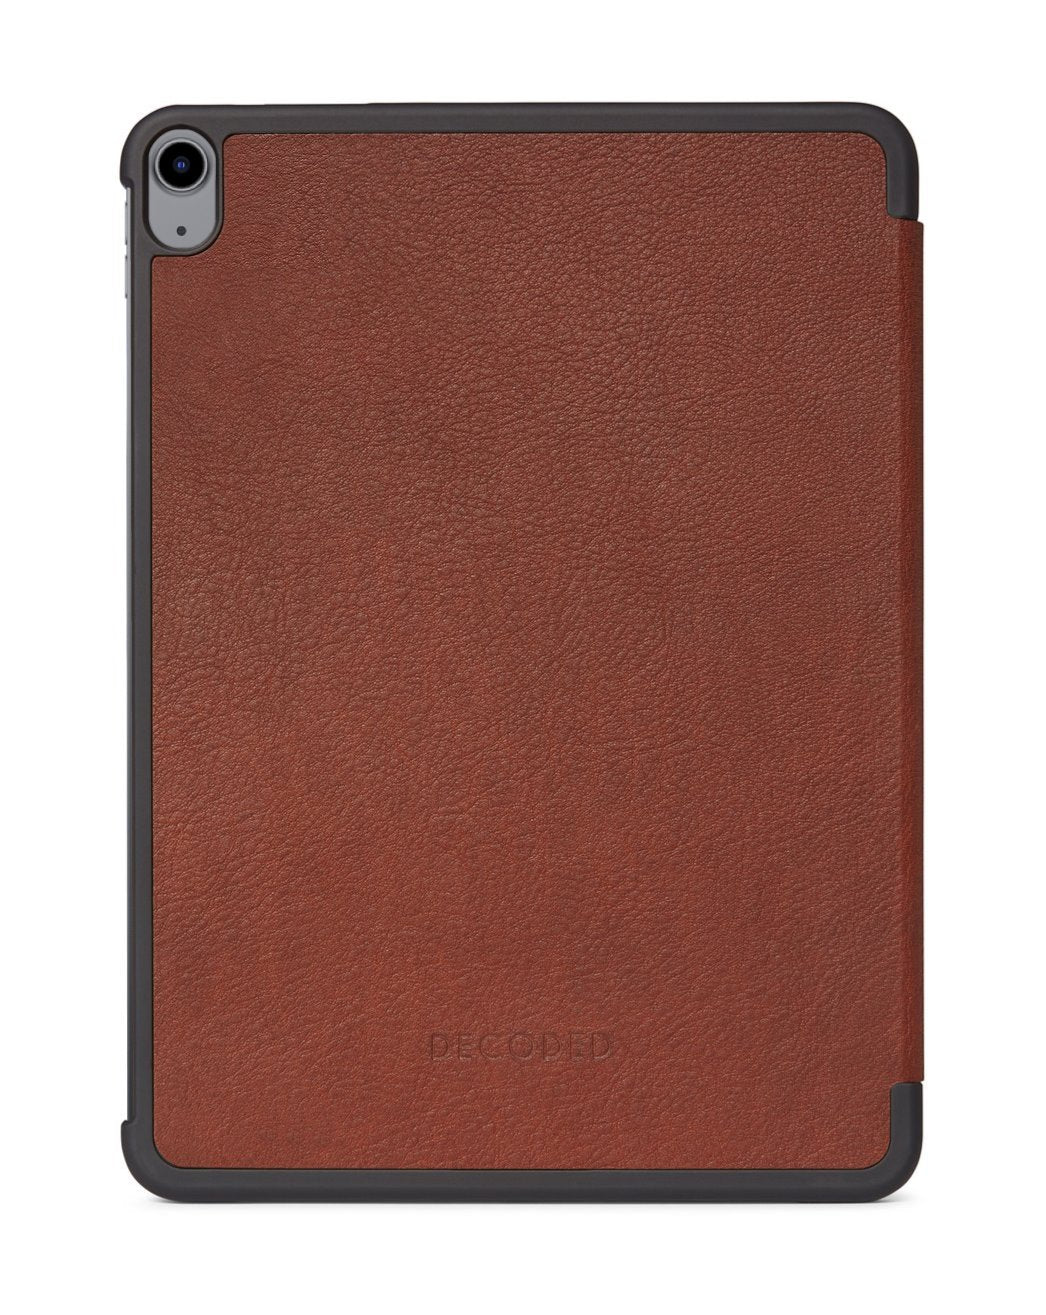 Leather Slim Cover iPad Air 10.9 4th Gen (2020) Brown